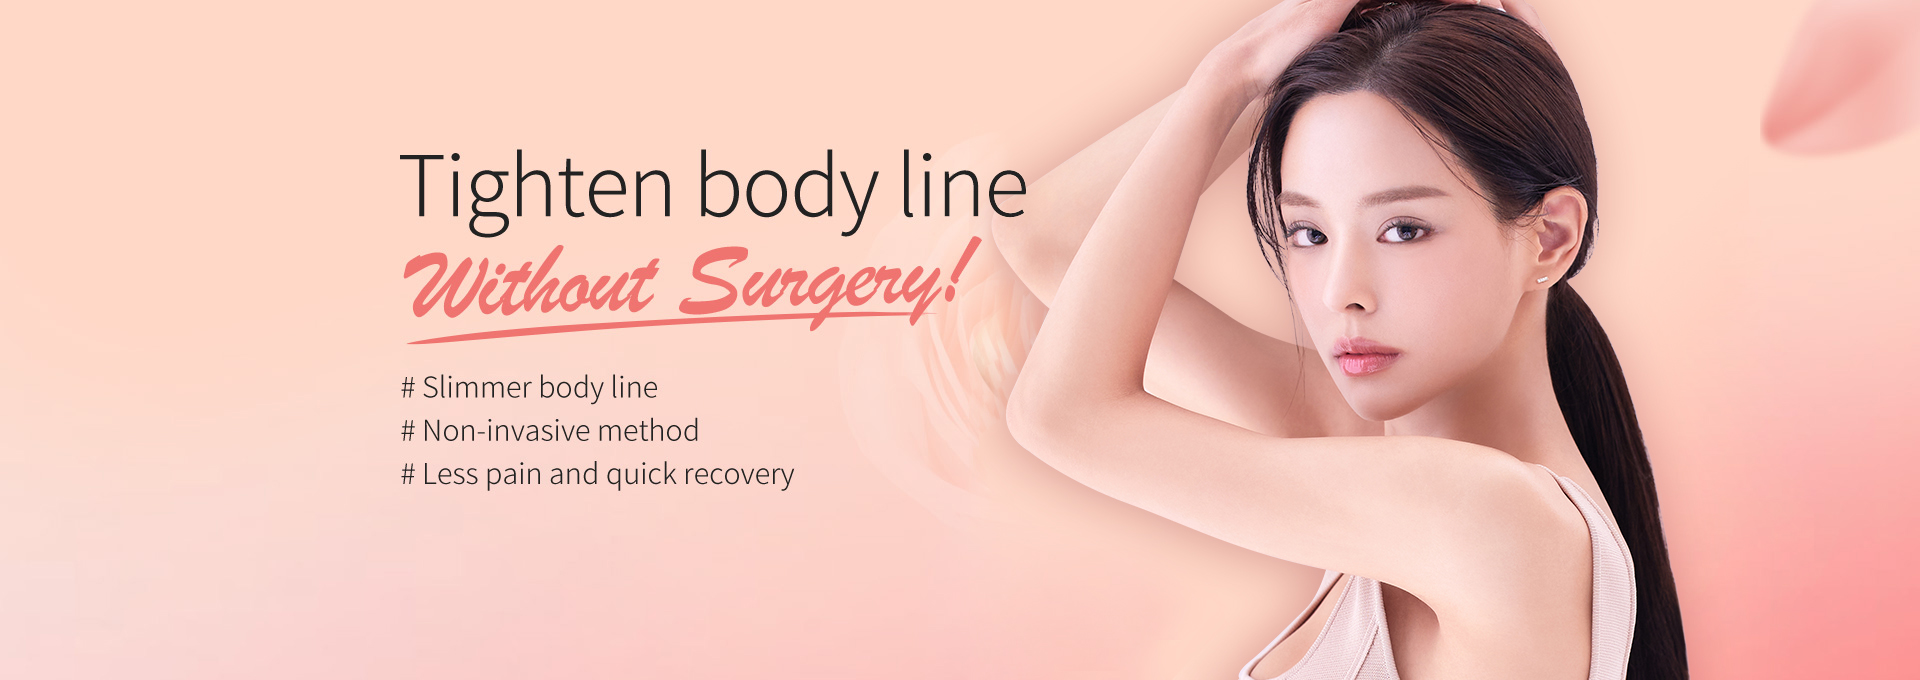 Tighten body line without surgery!